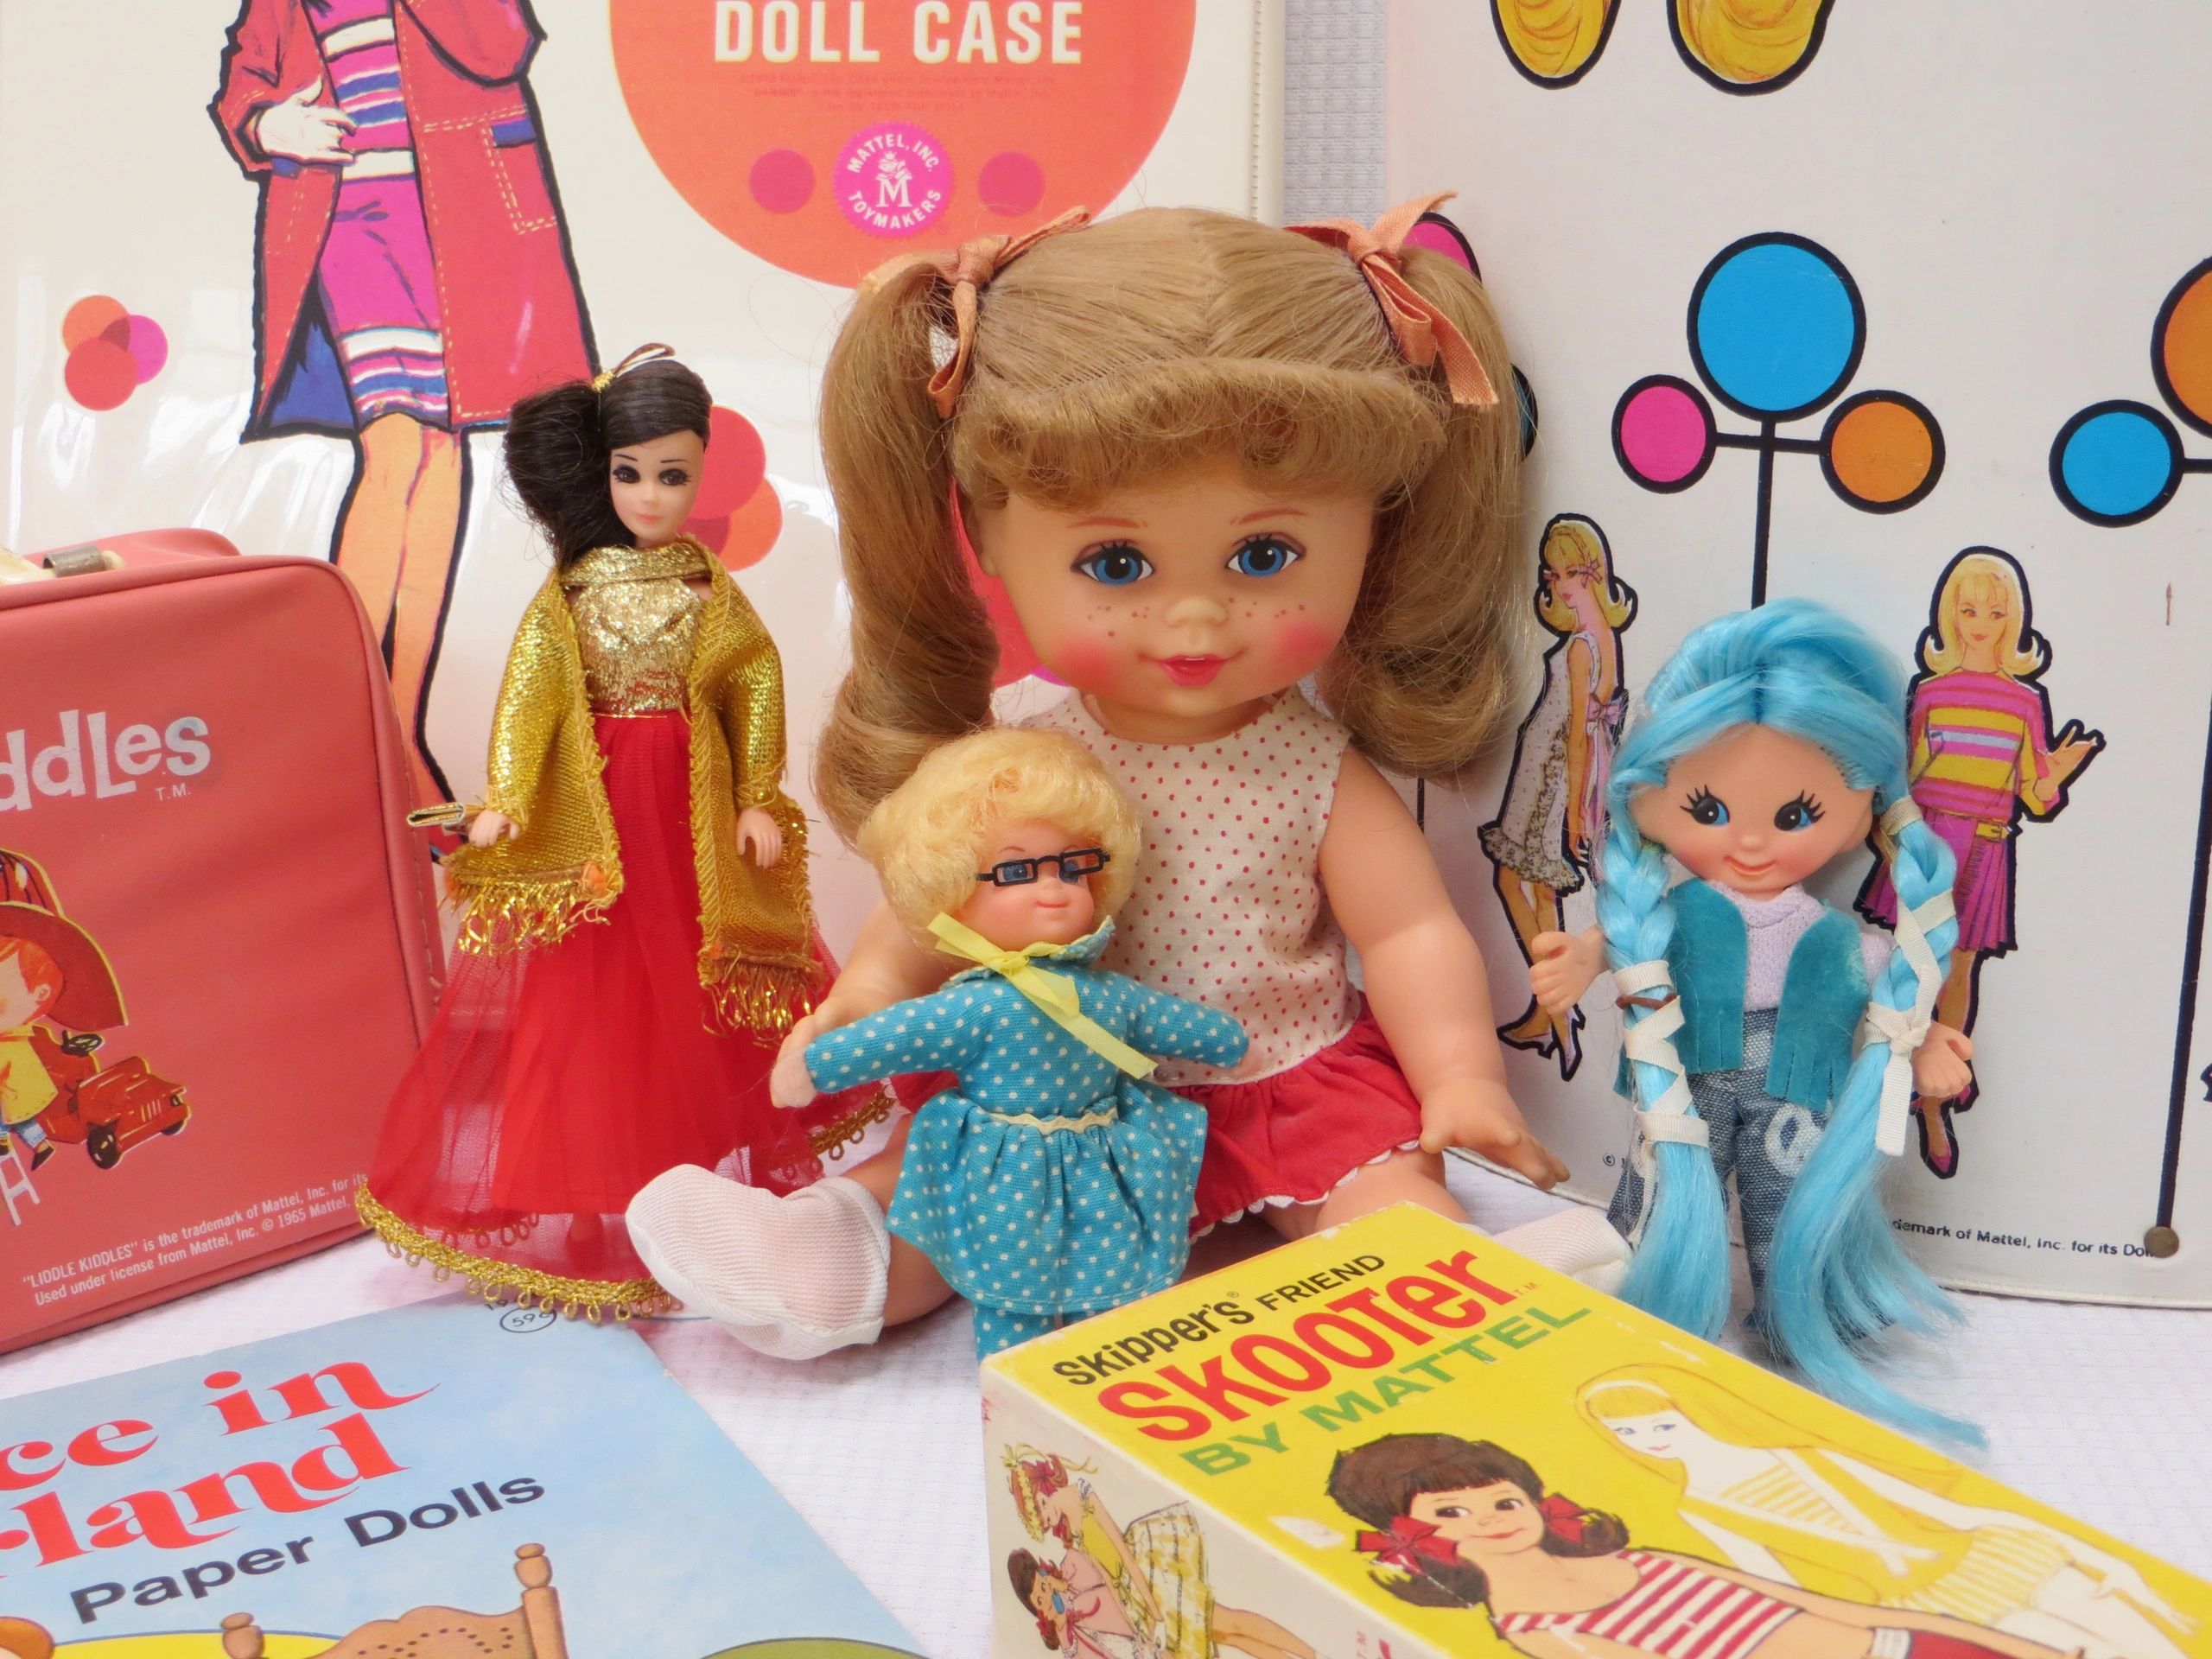 toys-of-another-time-vintage-dolls-1960s-dolls-barbie-dolls